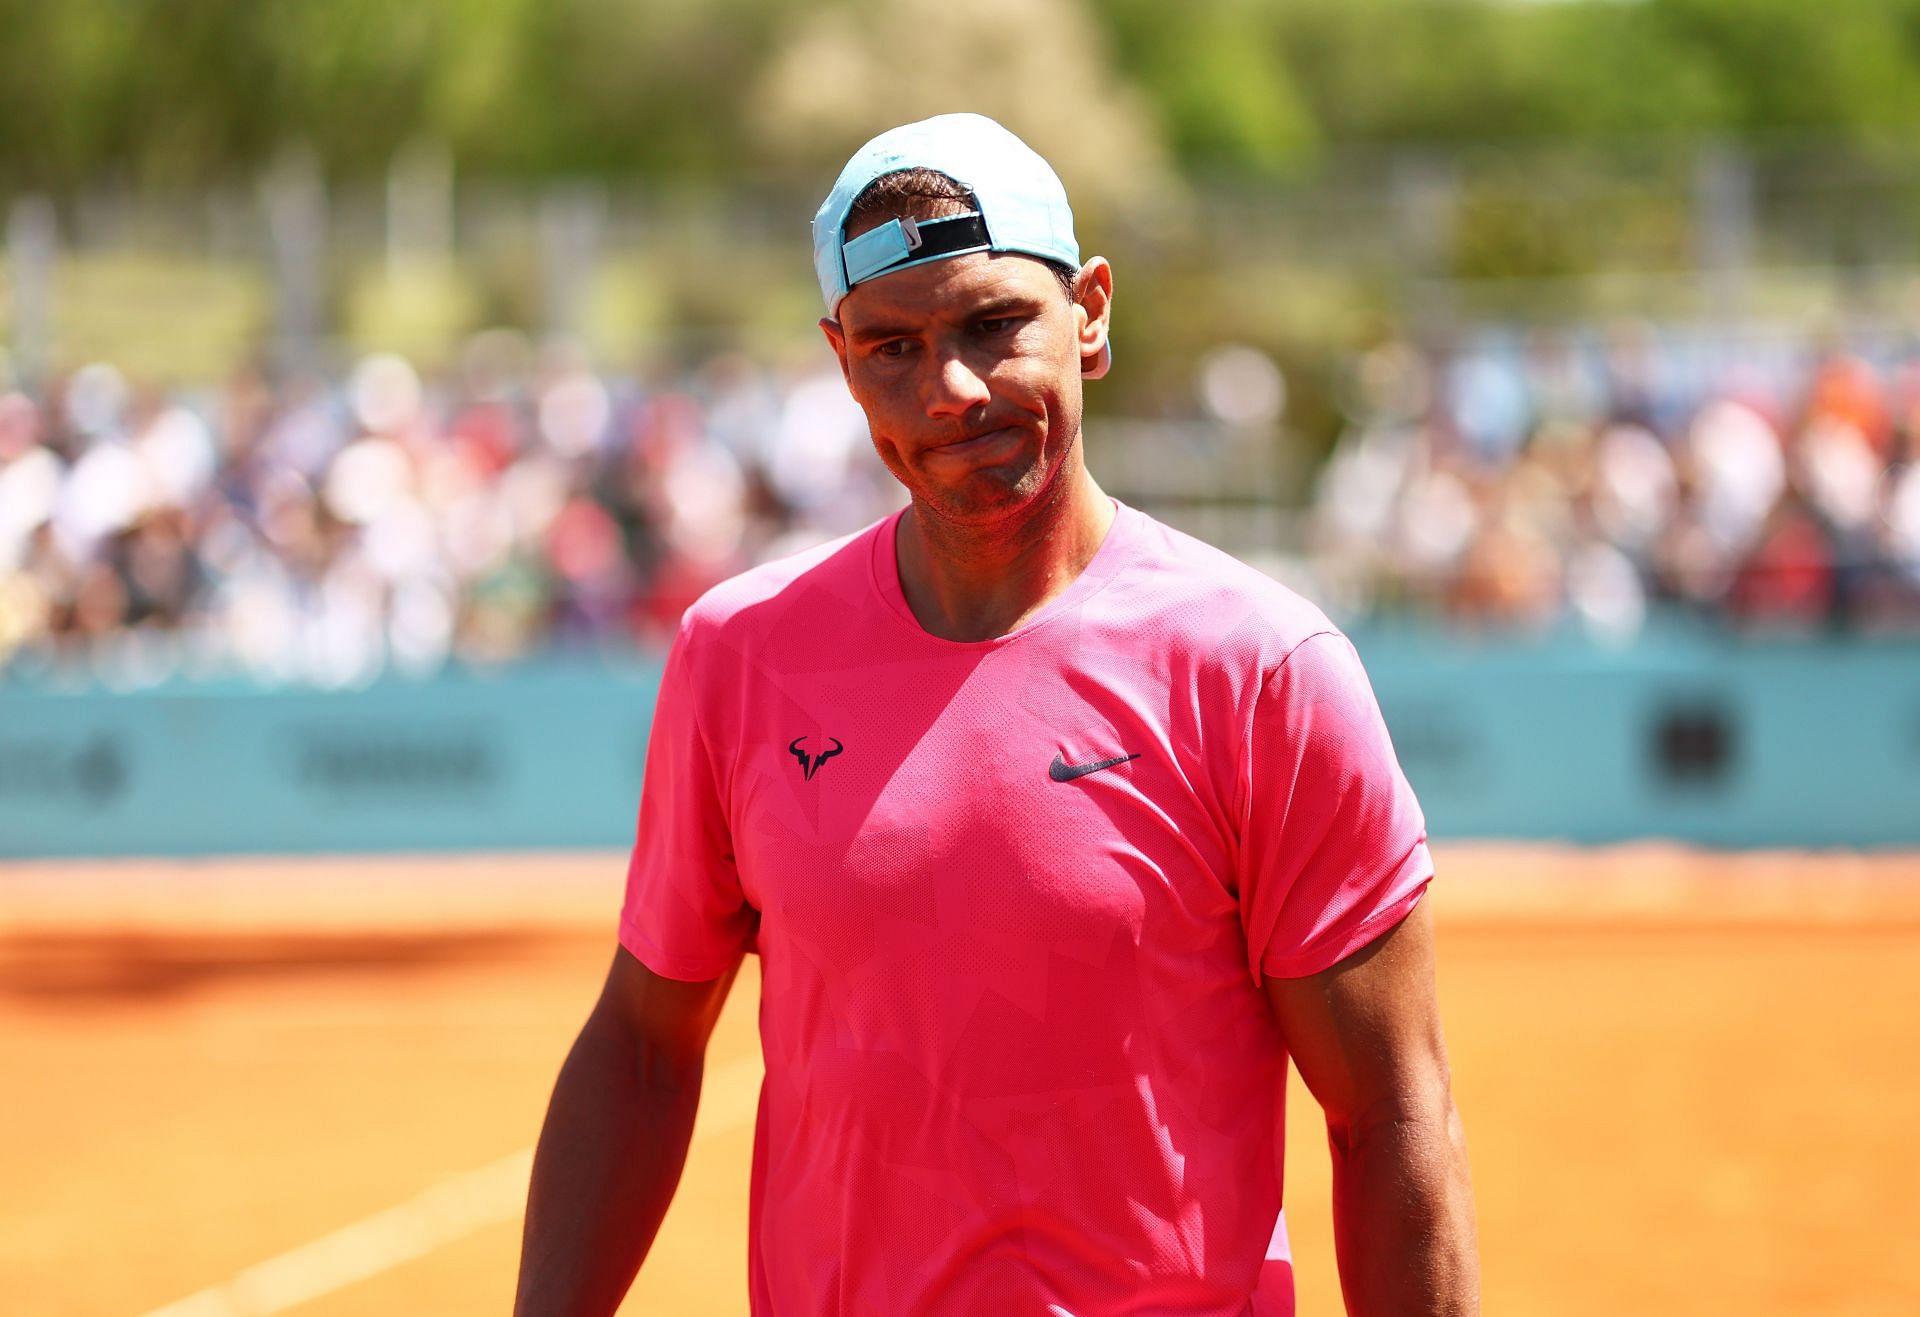 Rafael Nadal recalled his first ever ATP tour level match during the interview